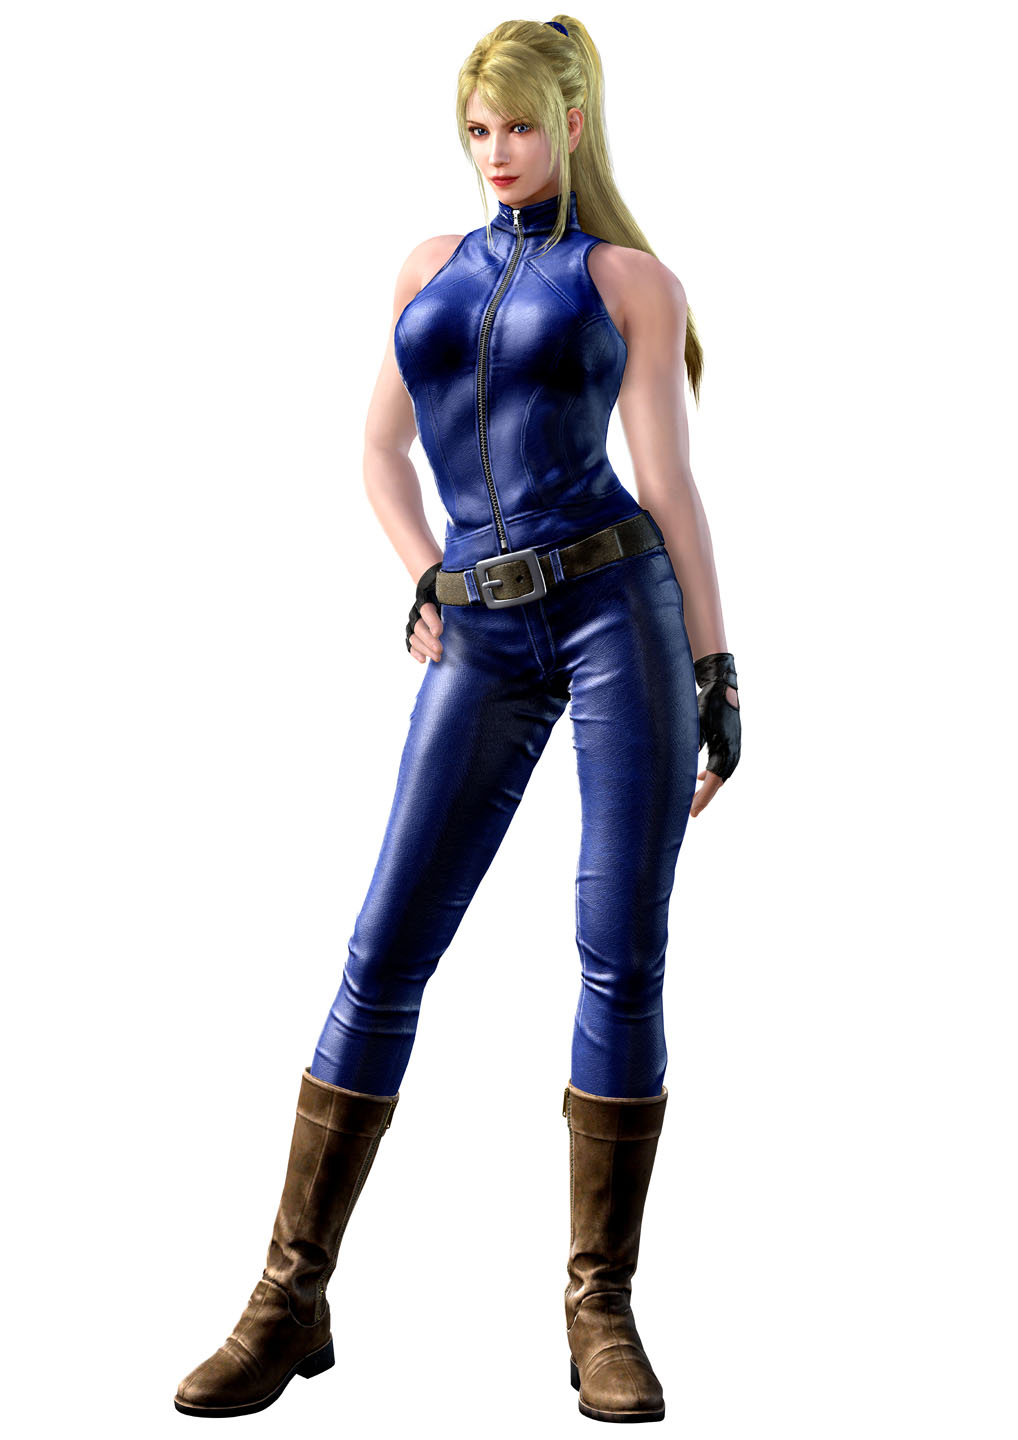 Virtua Fighter/Dead Or Alive 5 11" Tall Unpainted Resin Kit Details about   1/6 Sarah Bryant